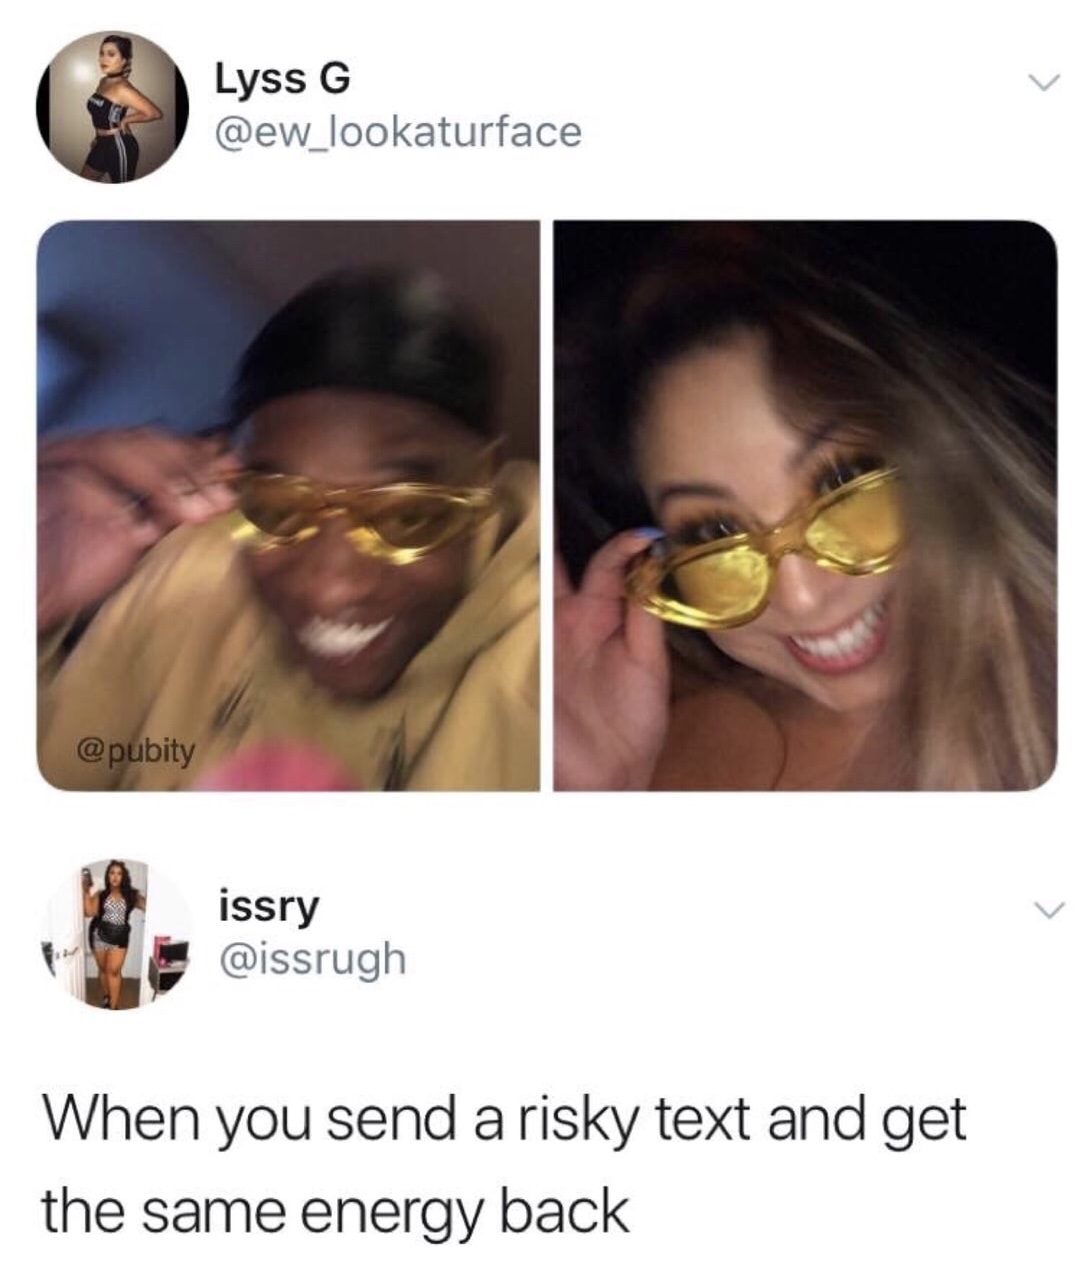 sending a risky text - Lyss G issry When you send a risky text and get the same energy back